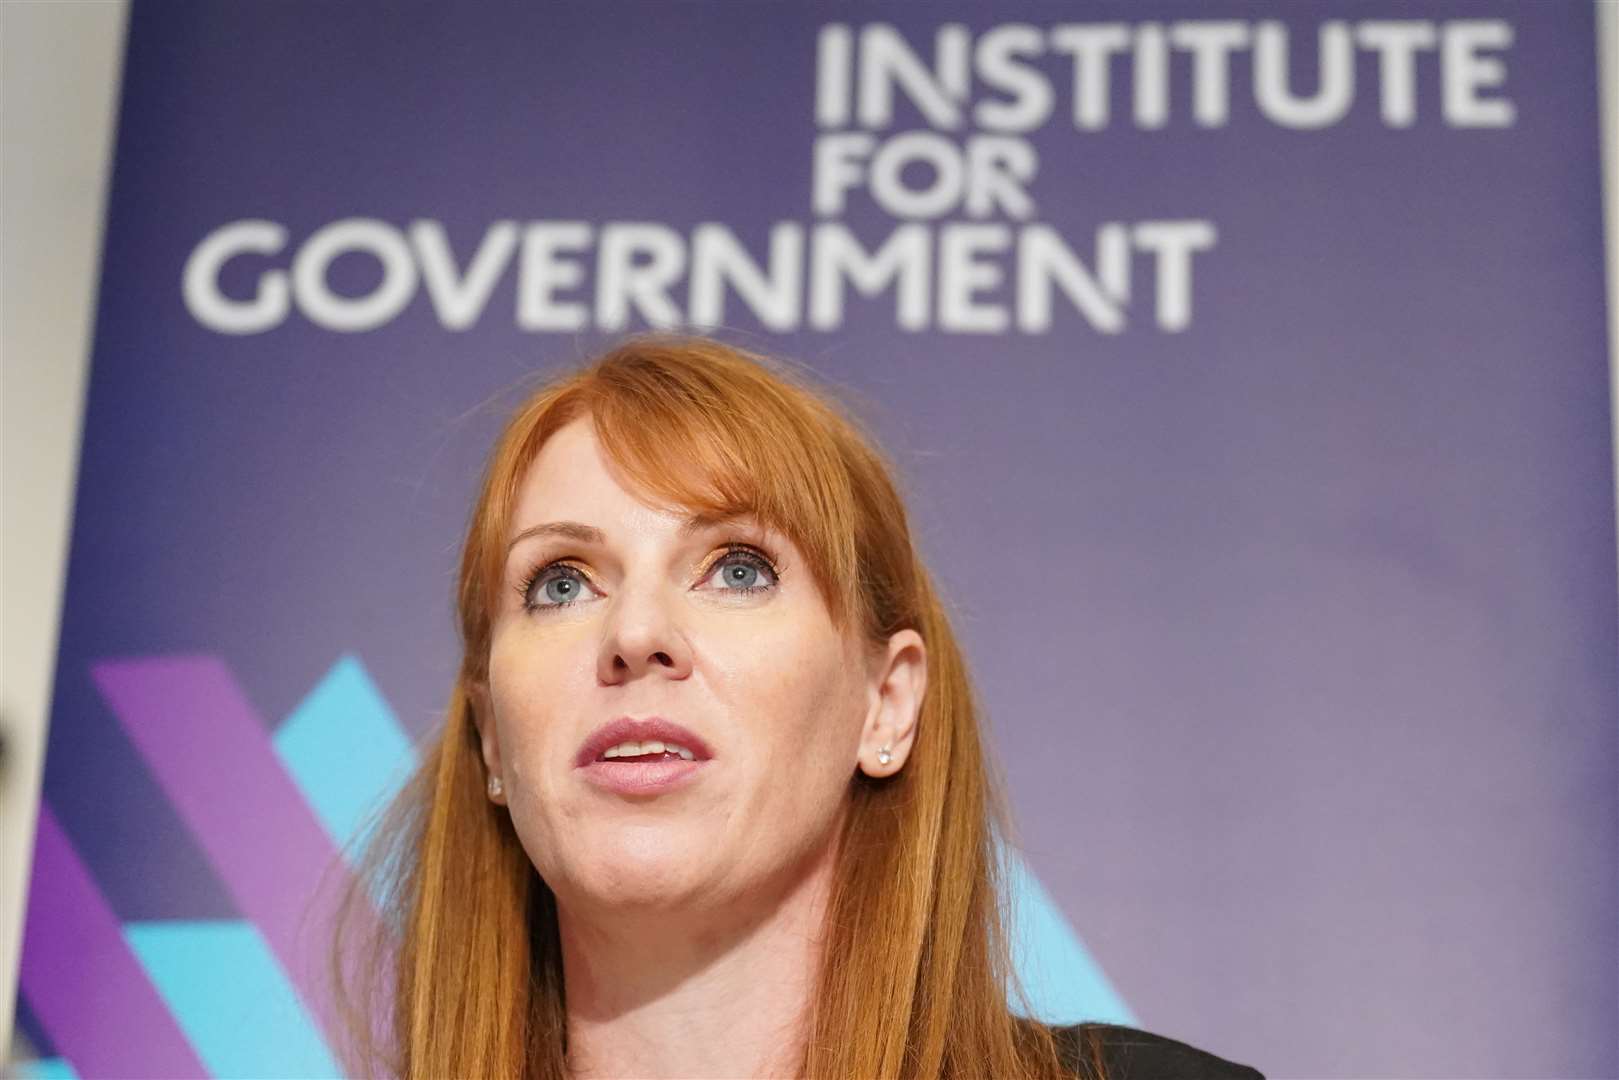 Labour deputy leader Angela Rayner, speaking at the Institute for Government, set out how her party would improve trust in politics if it wins the next election (Stefan Rousseau/PA)